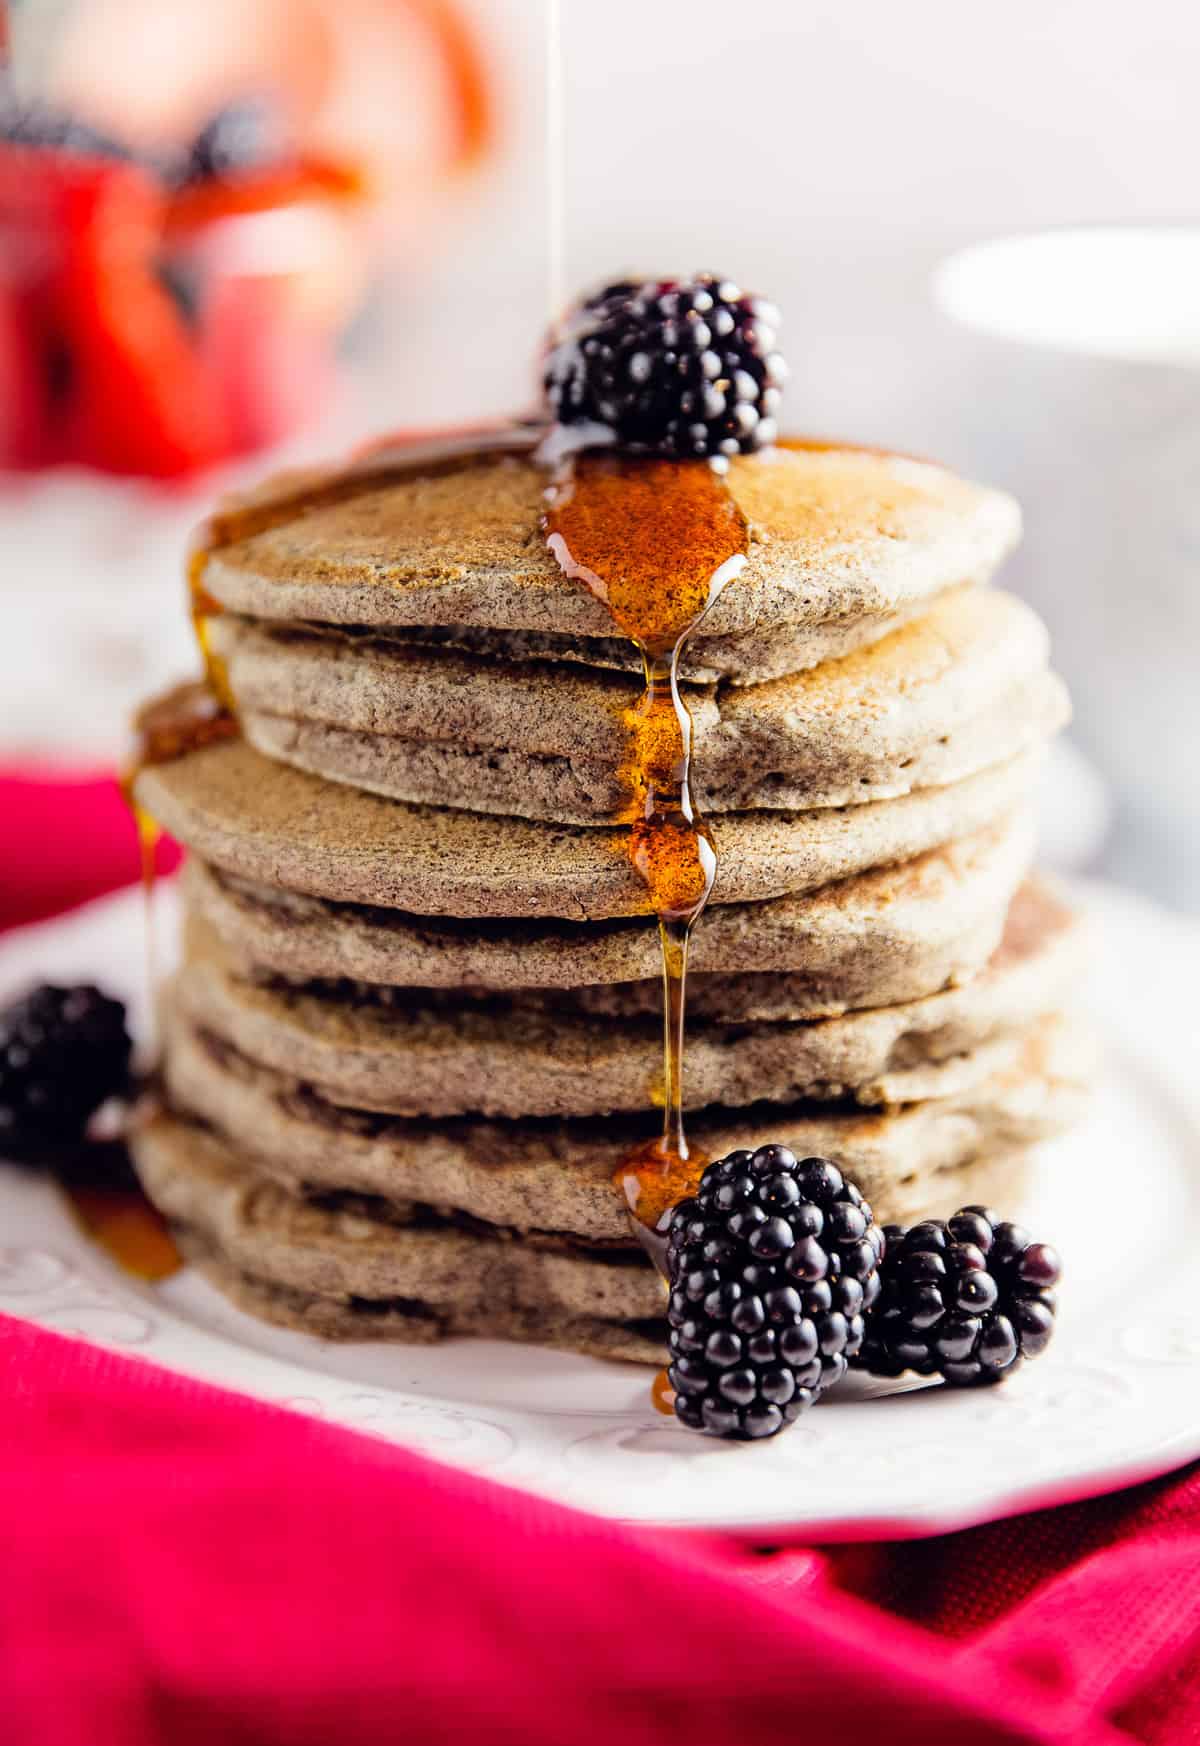 buckwheat pancakes, pancakes, maple syrup, refined sugar free, no refined sugar, breakfast, vegan, vegan recipe, whole food plant based recipe, whole food plant based, vegetarian, vegetarian recipe, gluten free, gluten free recipe, vegan breakfast, vegan meals, vegetarian breakfast, vegetarian meal, whole food plant based breakfast, whole food plant based meal, gluten free breakfast, gluten free meal, healthy, oil free, no oil, healthy breakfast, healthy pancakes, fast, simple, quick, easy, 30 minutes or less, summer, fall, winter, spring, entertaining, holiday